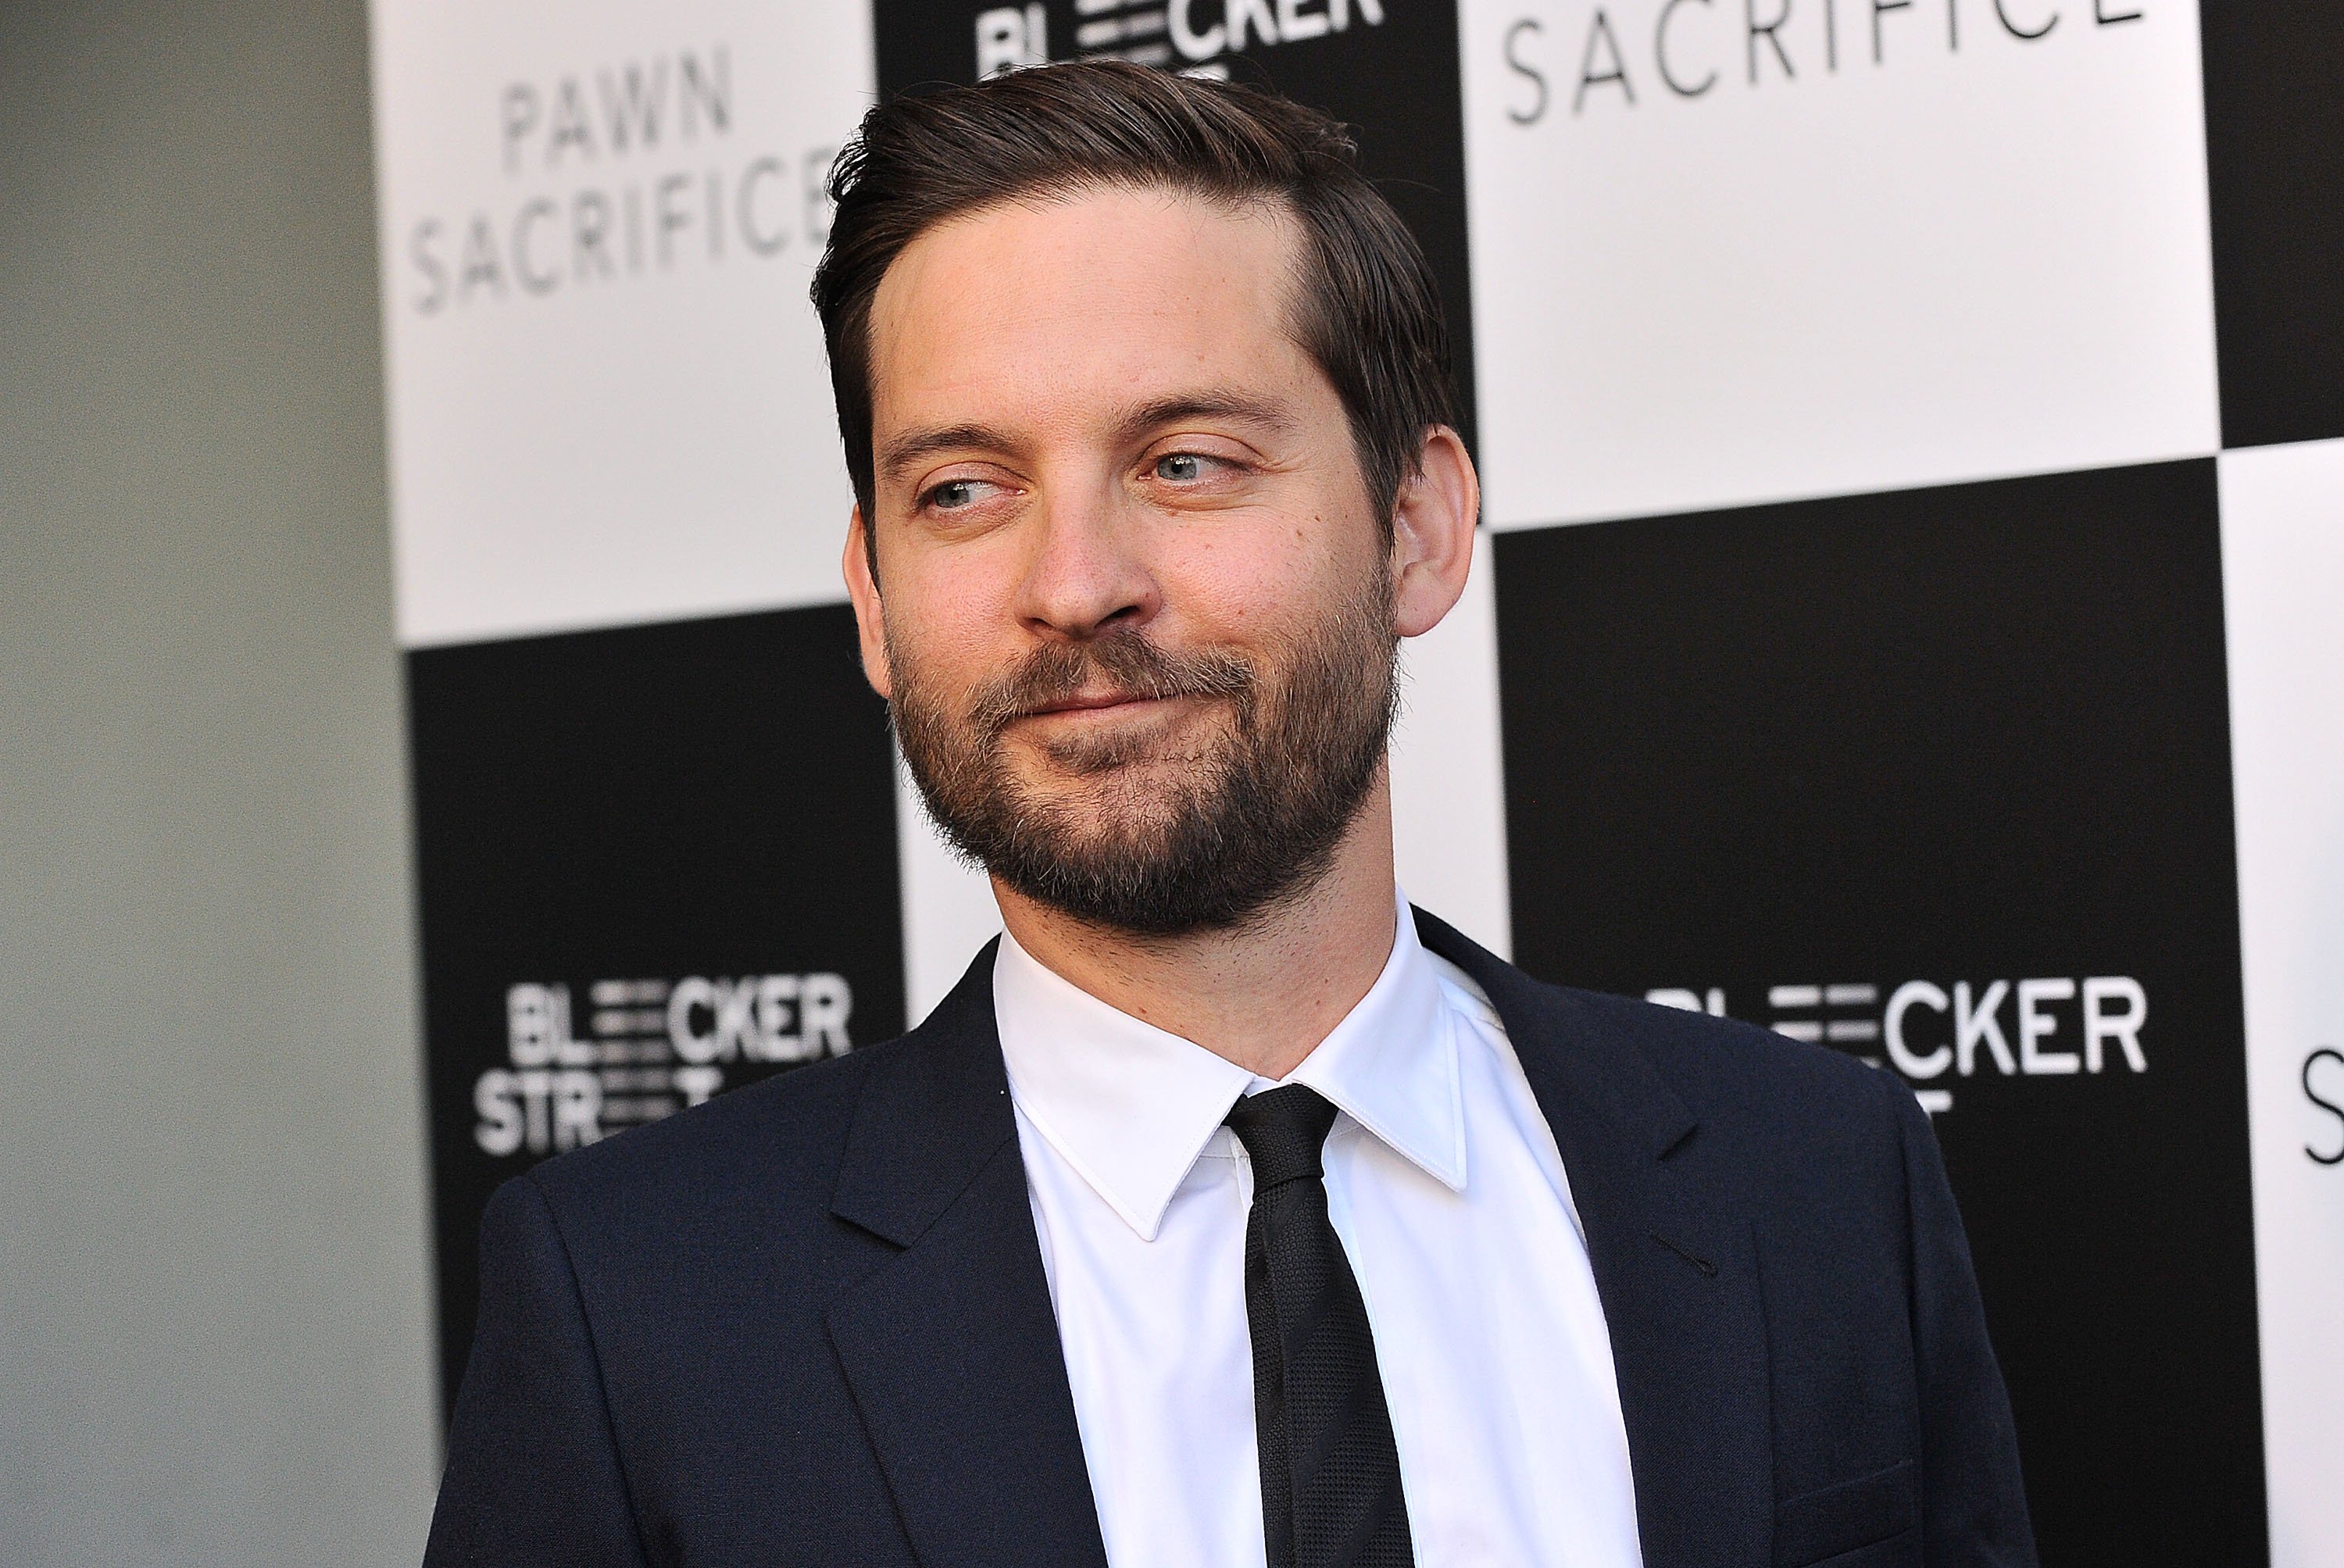 'Spider-Man: No Way Home' star Tobey Maguire wears a black suit over a white button-up shirt and black tie.